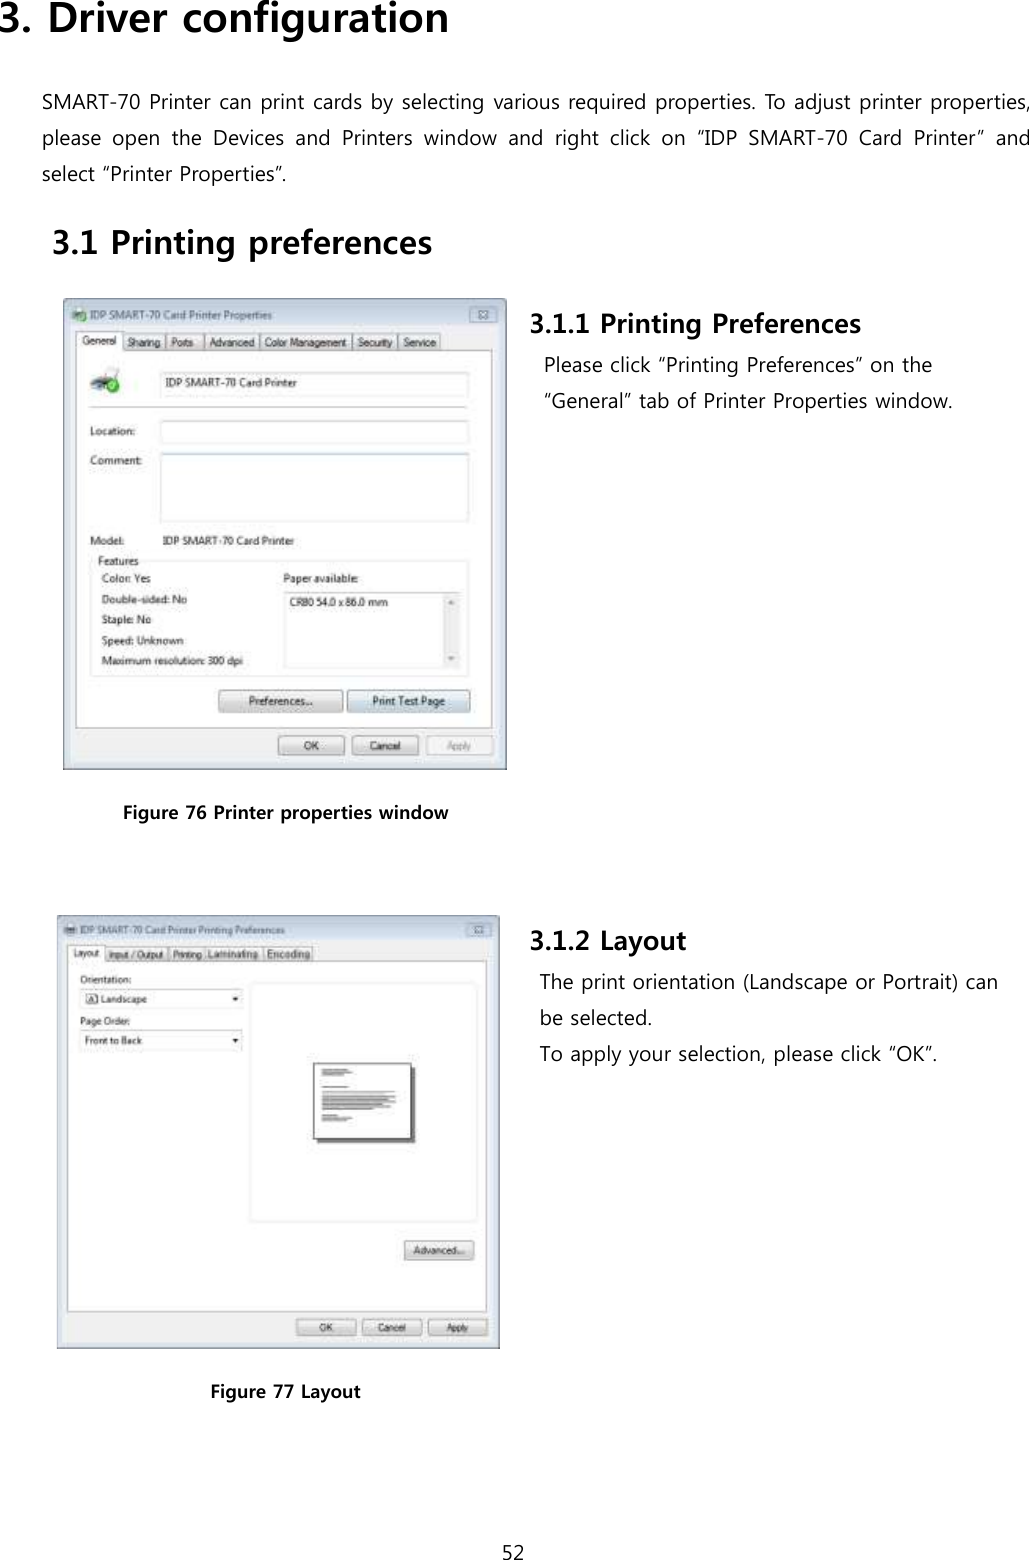 52  3. Driver configuration SMART-70 Printer can print cards by selecting various required properties. To adjust printer properties, please  open  the  Devices  and  Printers  window and  right  click  on  “IDP  SMART-70  Card  Printer”  and select “Printer Properties”.   3.1 Printing preferences  Figure 76 Printer properties window  3.1.1 Printing Preferences Please click “Printing Preferences” on the “General” tab of Printer Properties window.  Figure 77 Layout 3.1.2 Layout The print orientation (Landscape or Portrait) can   be selected.   To apply your selection, please click “OK”.  